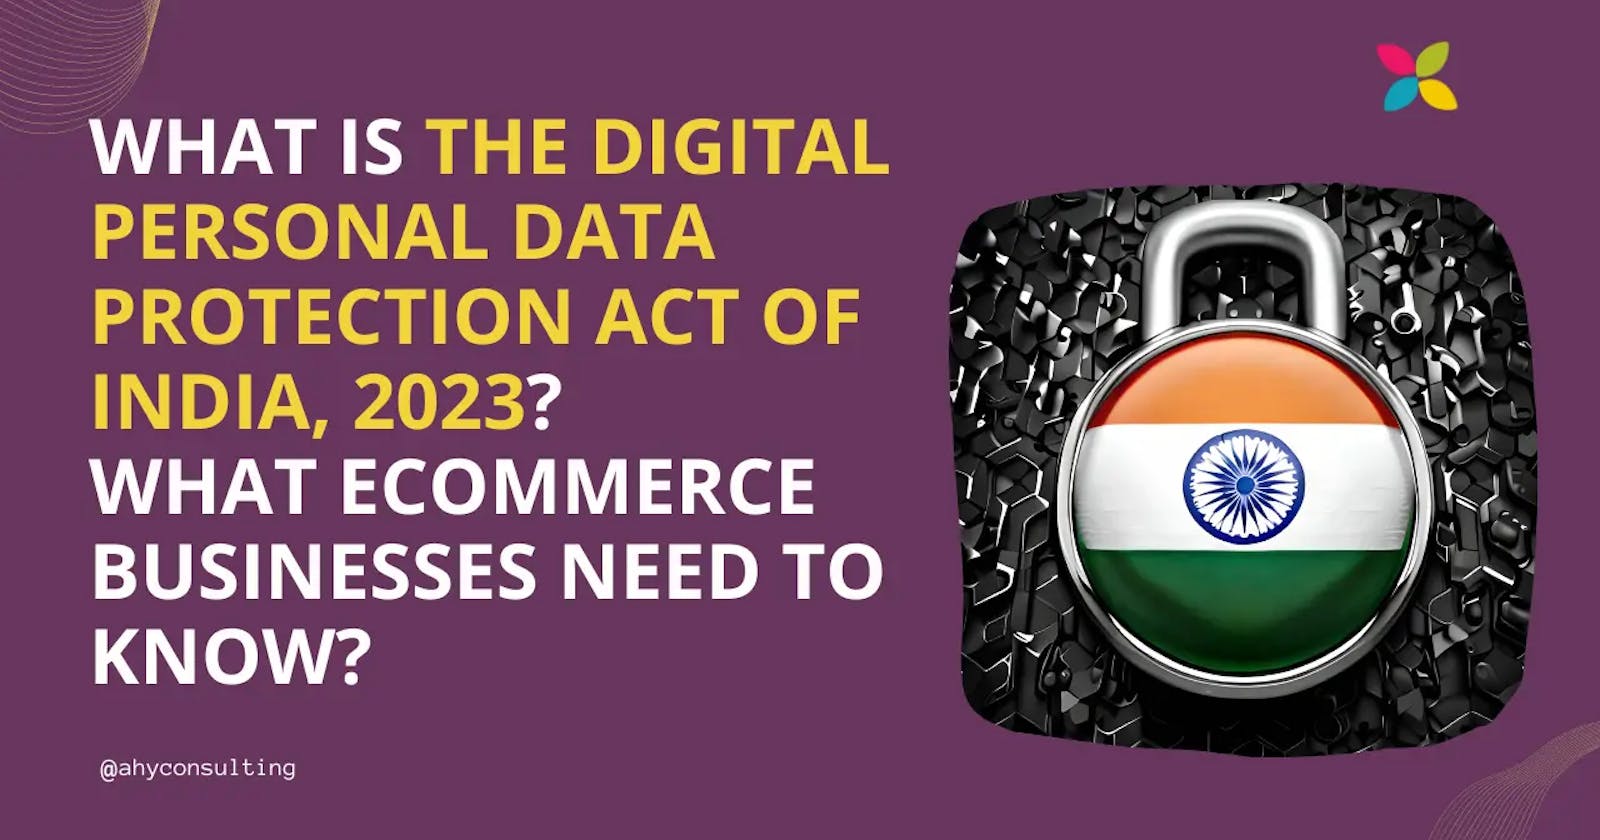 The Digital Personal Data Protection Act, 2023: What eCommerce Businesses Need to Know